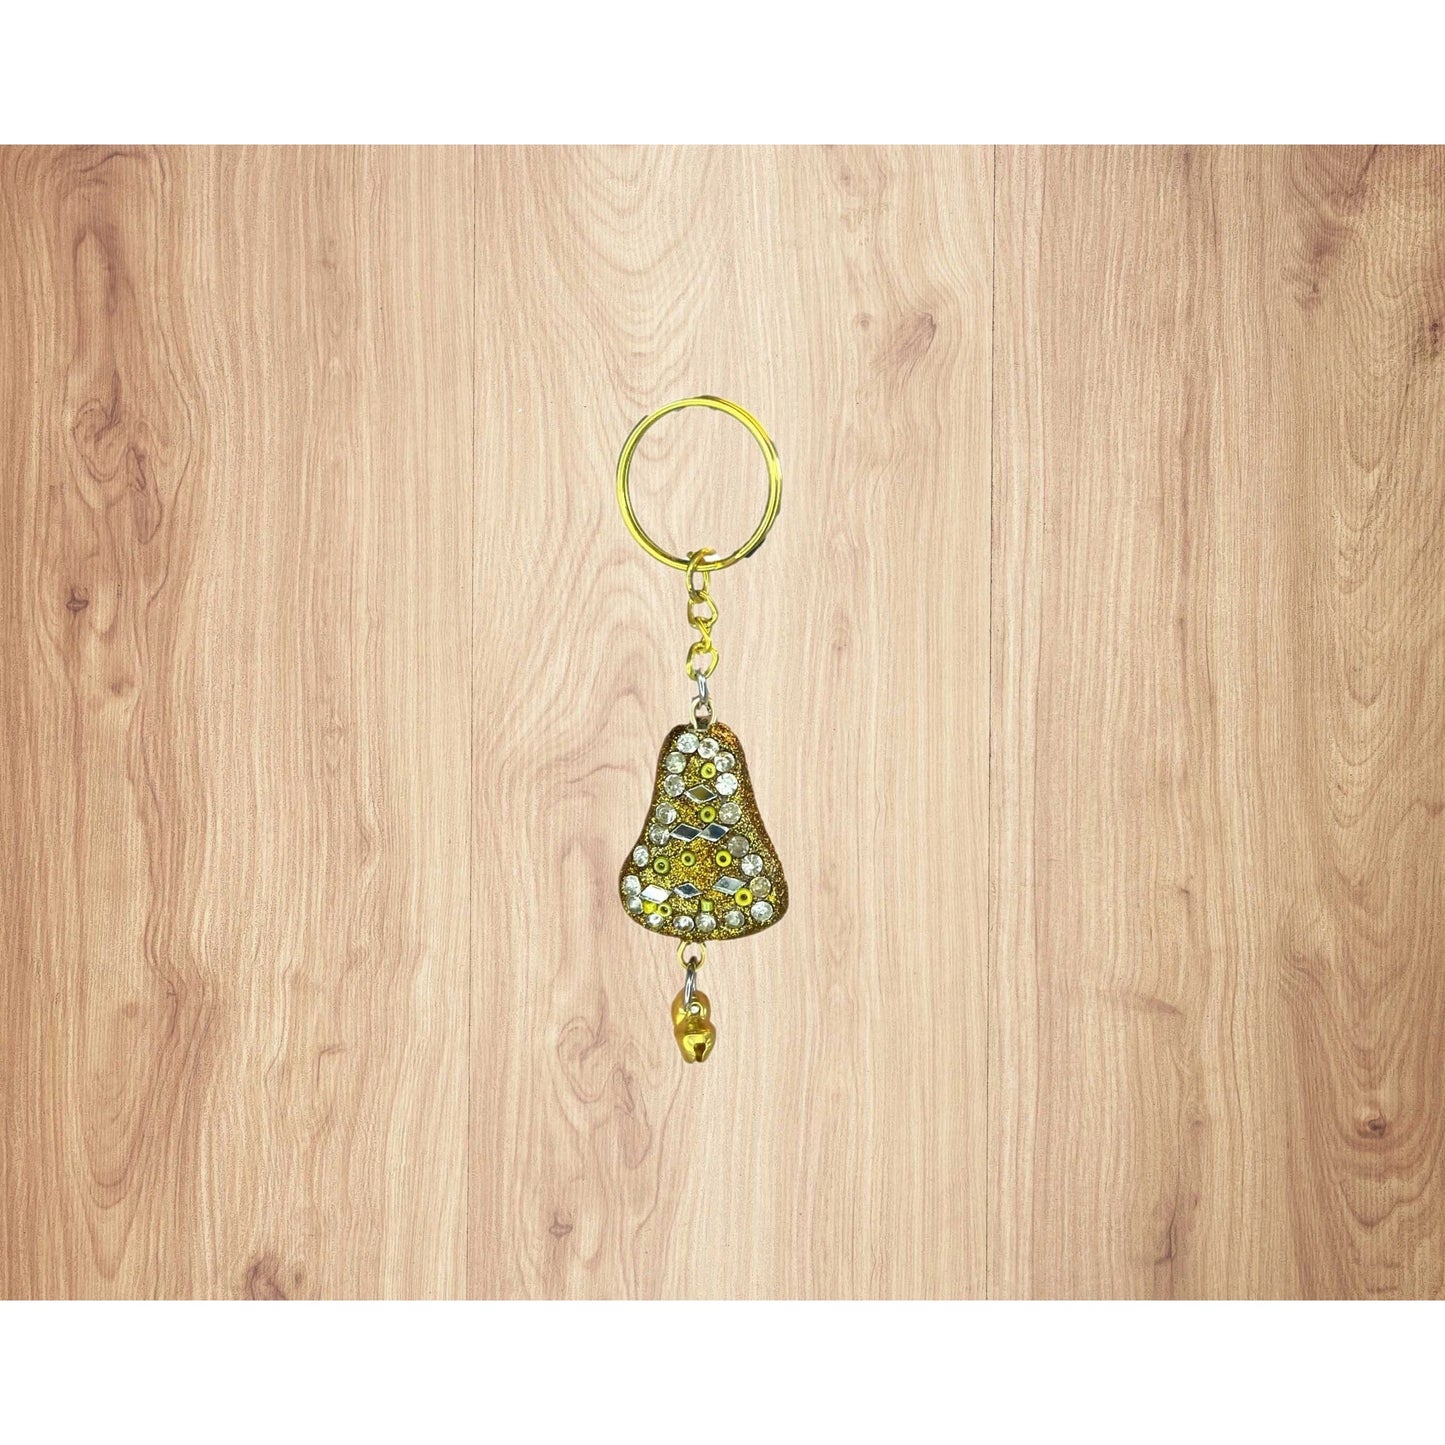 Handmade Rajasthani Bell Shaped Key Chain with Bells